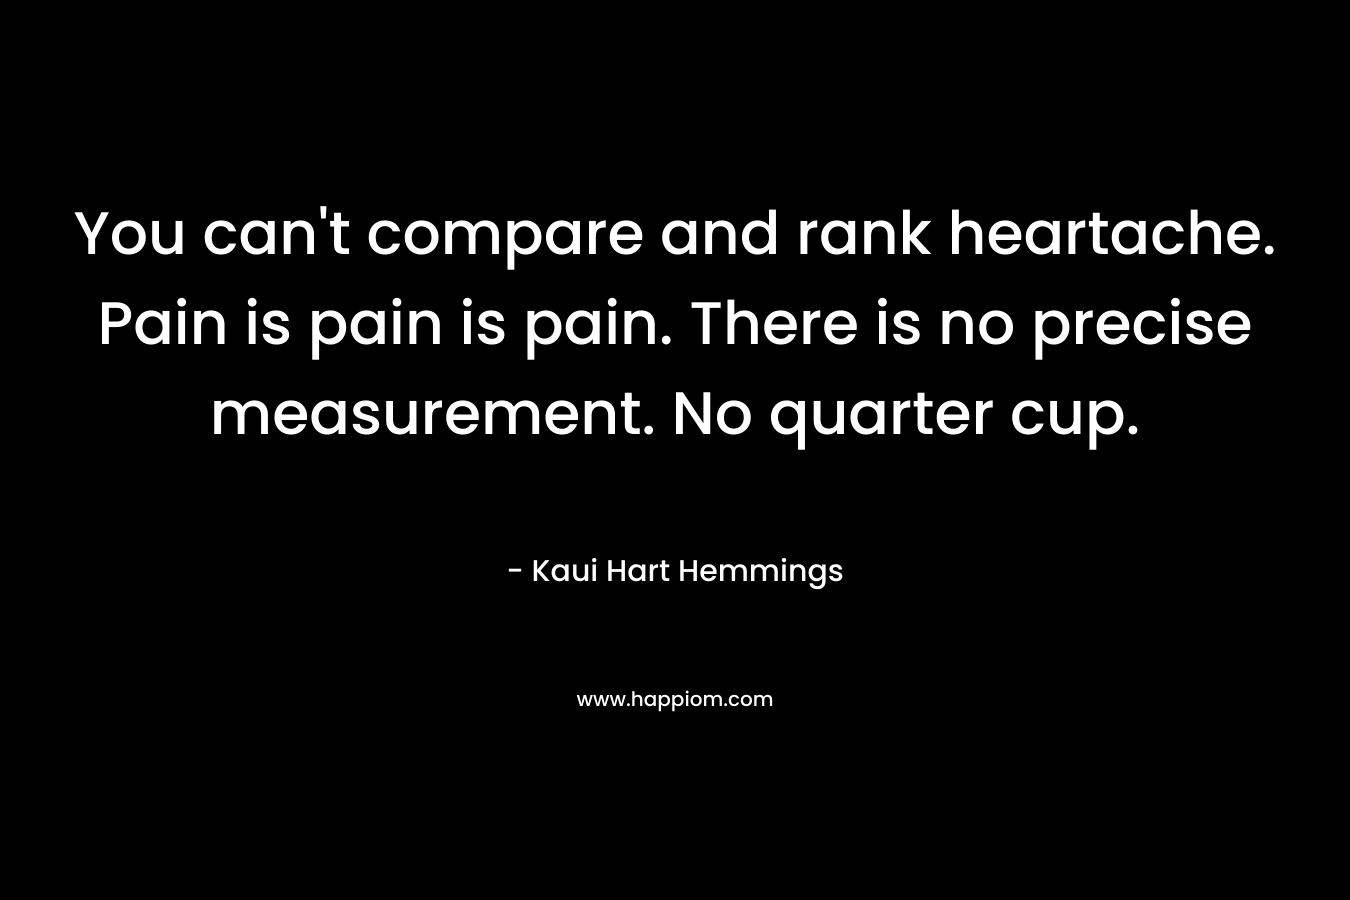 You can't compare and rank heartache. Pain is pain is pain. There is no precise measurement. No quarter cup.